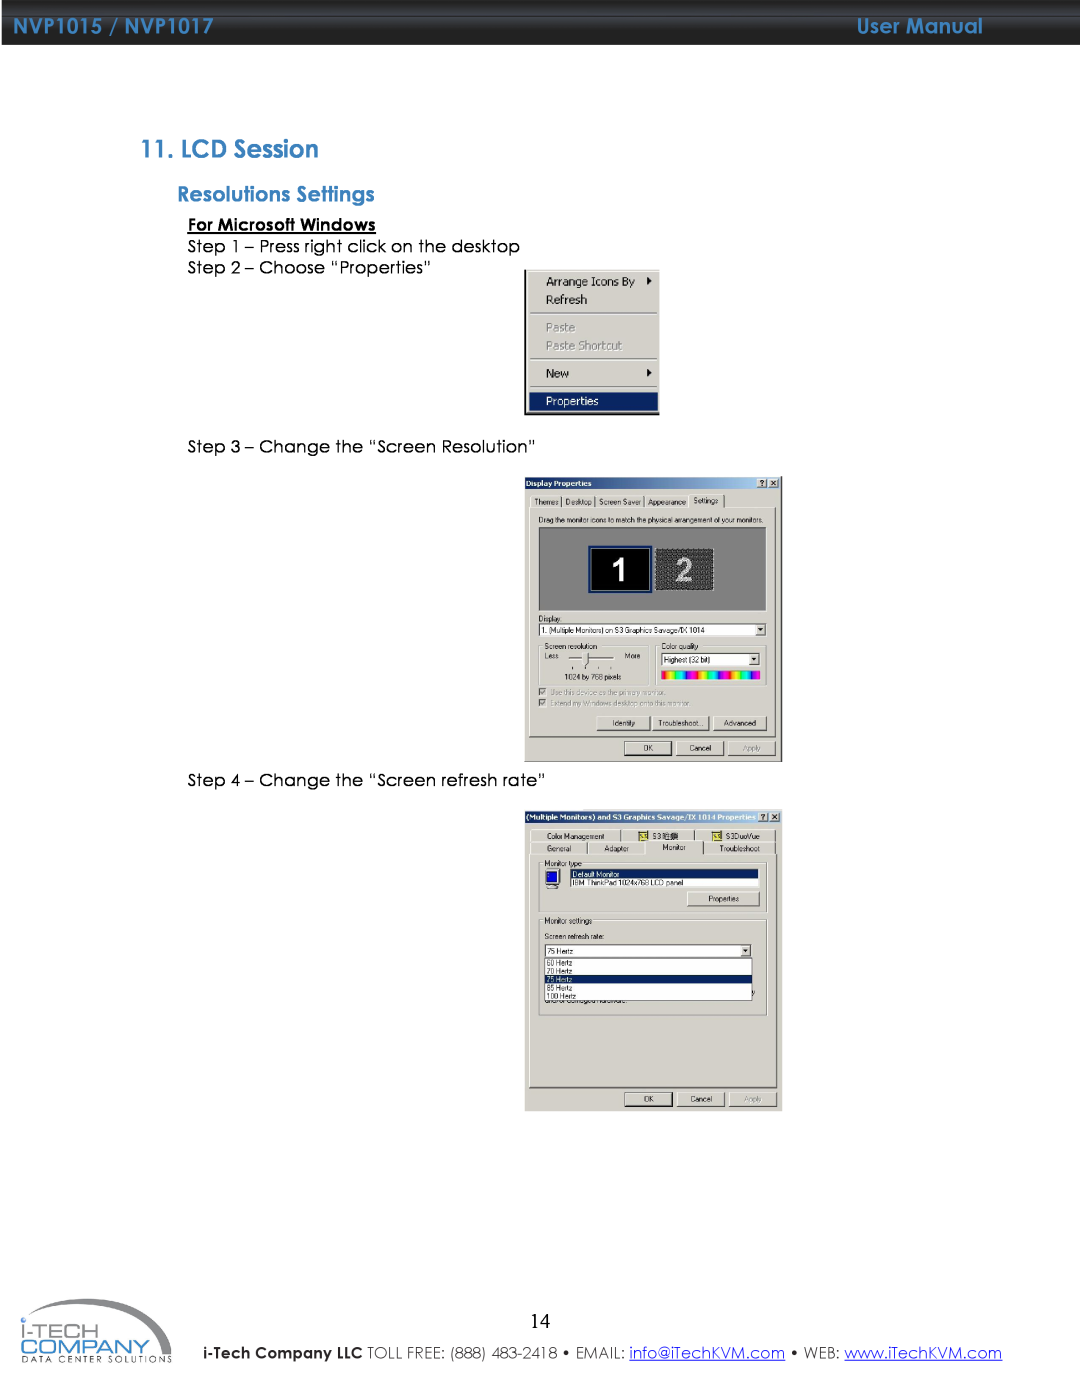 I-Tech Company Resolutions Settings, LCD Session, NVP1015 / NVP1017, User Manual, Change the “Screen refresh rate” 